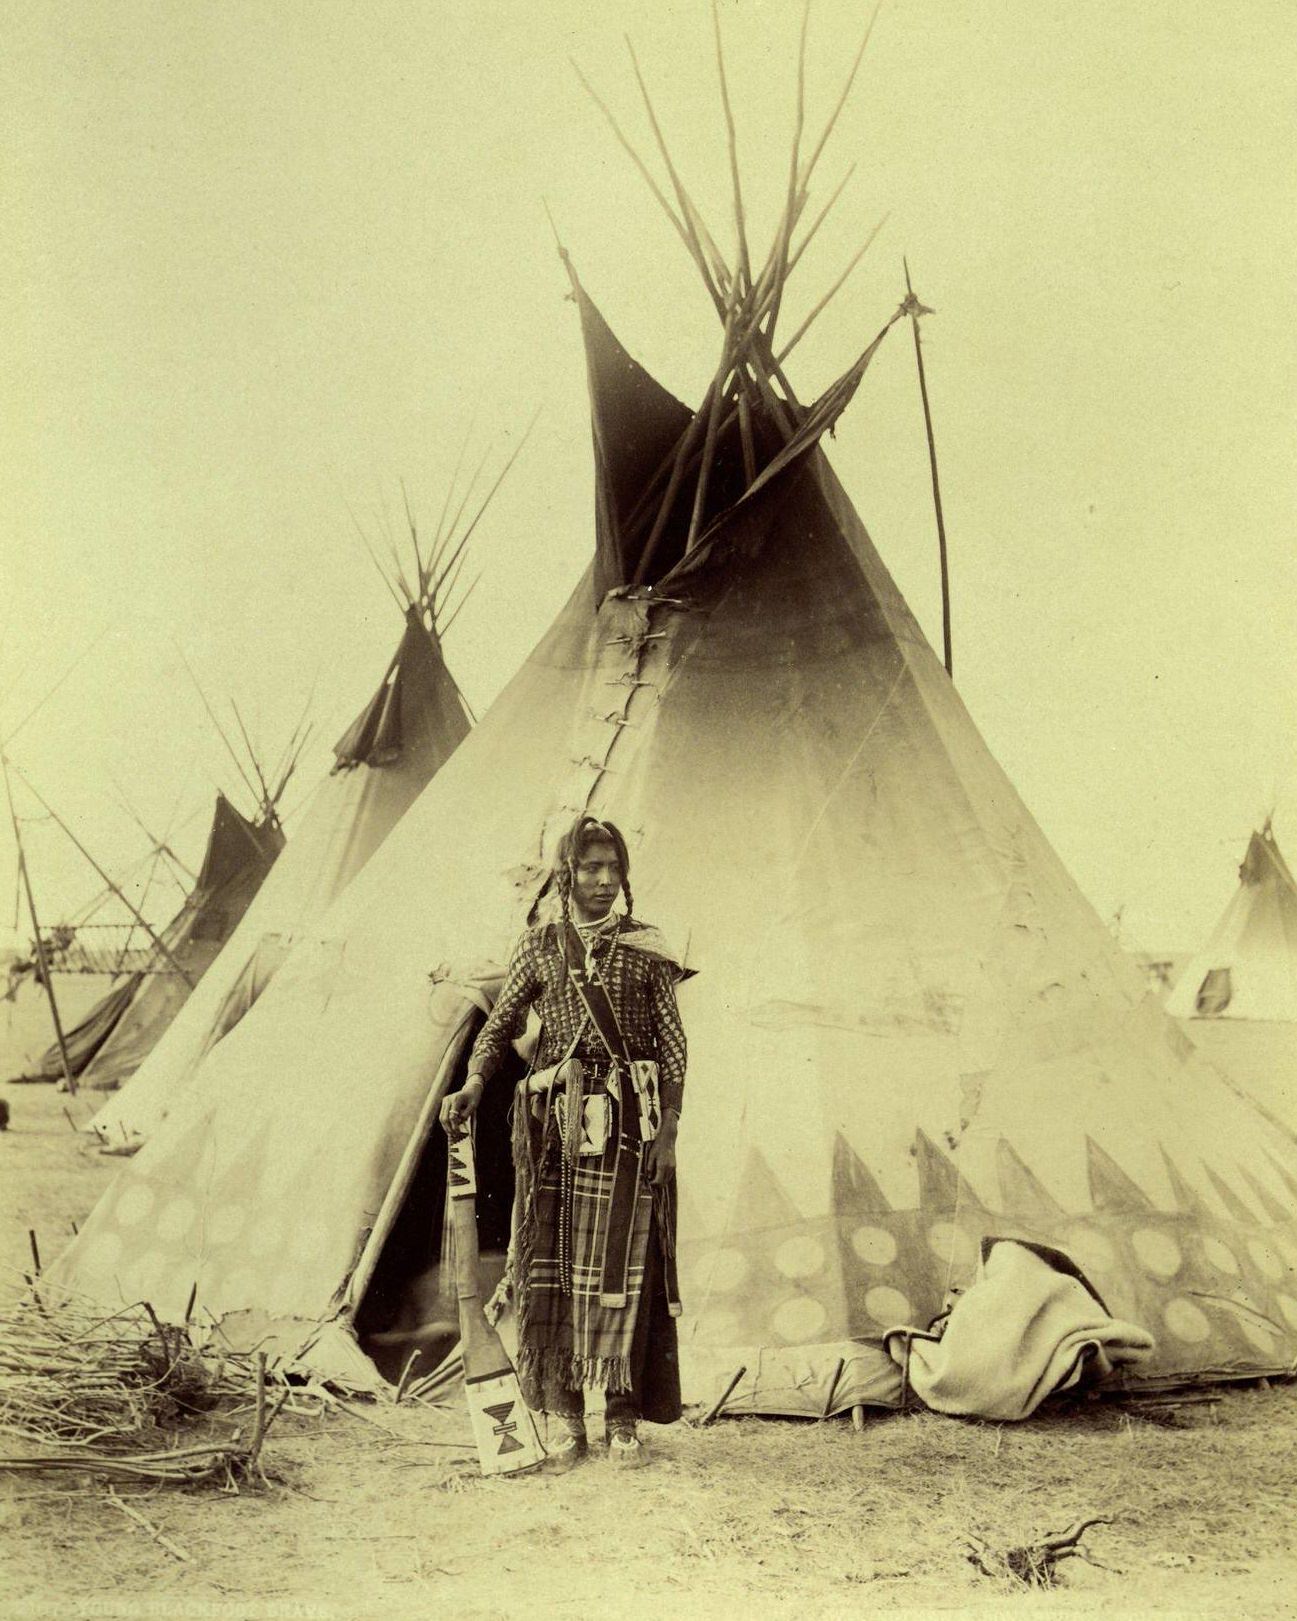 Blackfoot Brave, Montana, 1887: A young Native American warrior of the Blackfoot tribe stands in traditional clothing with a rifle in the entryway to his teepee home.